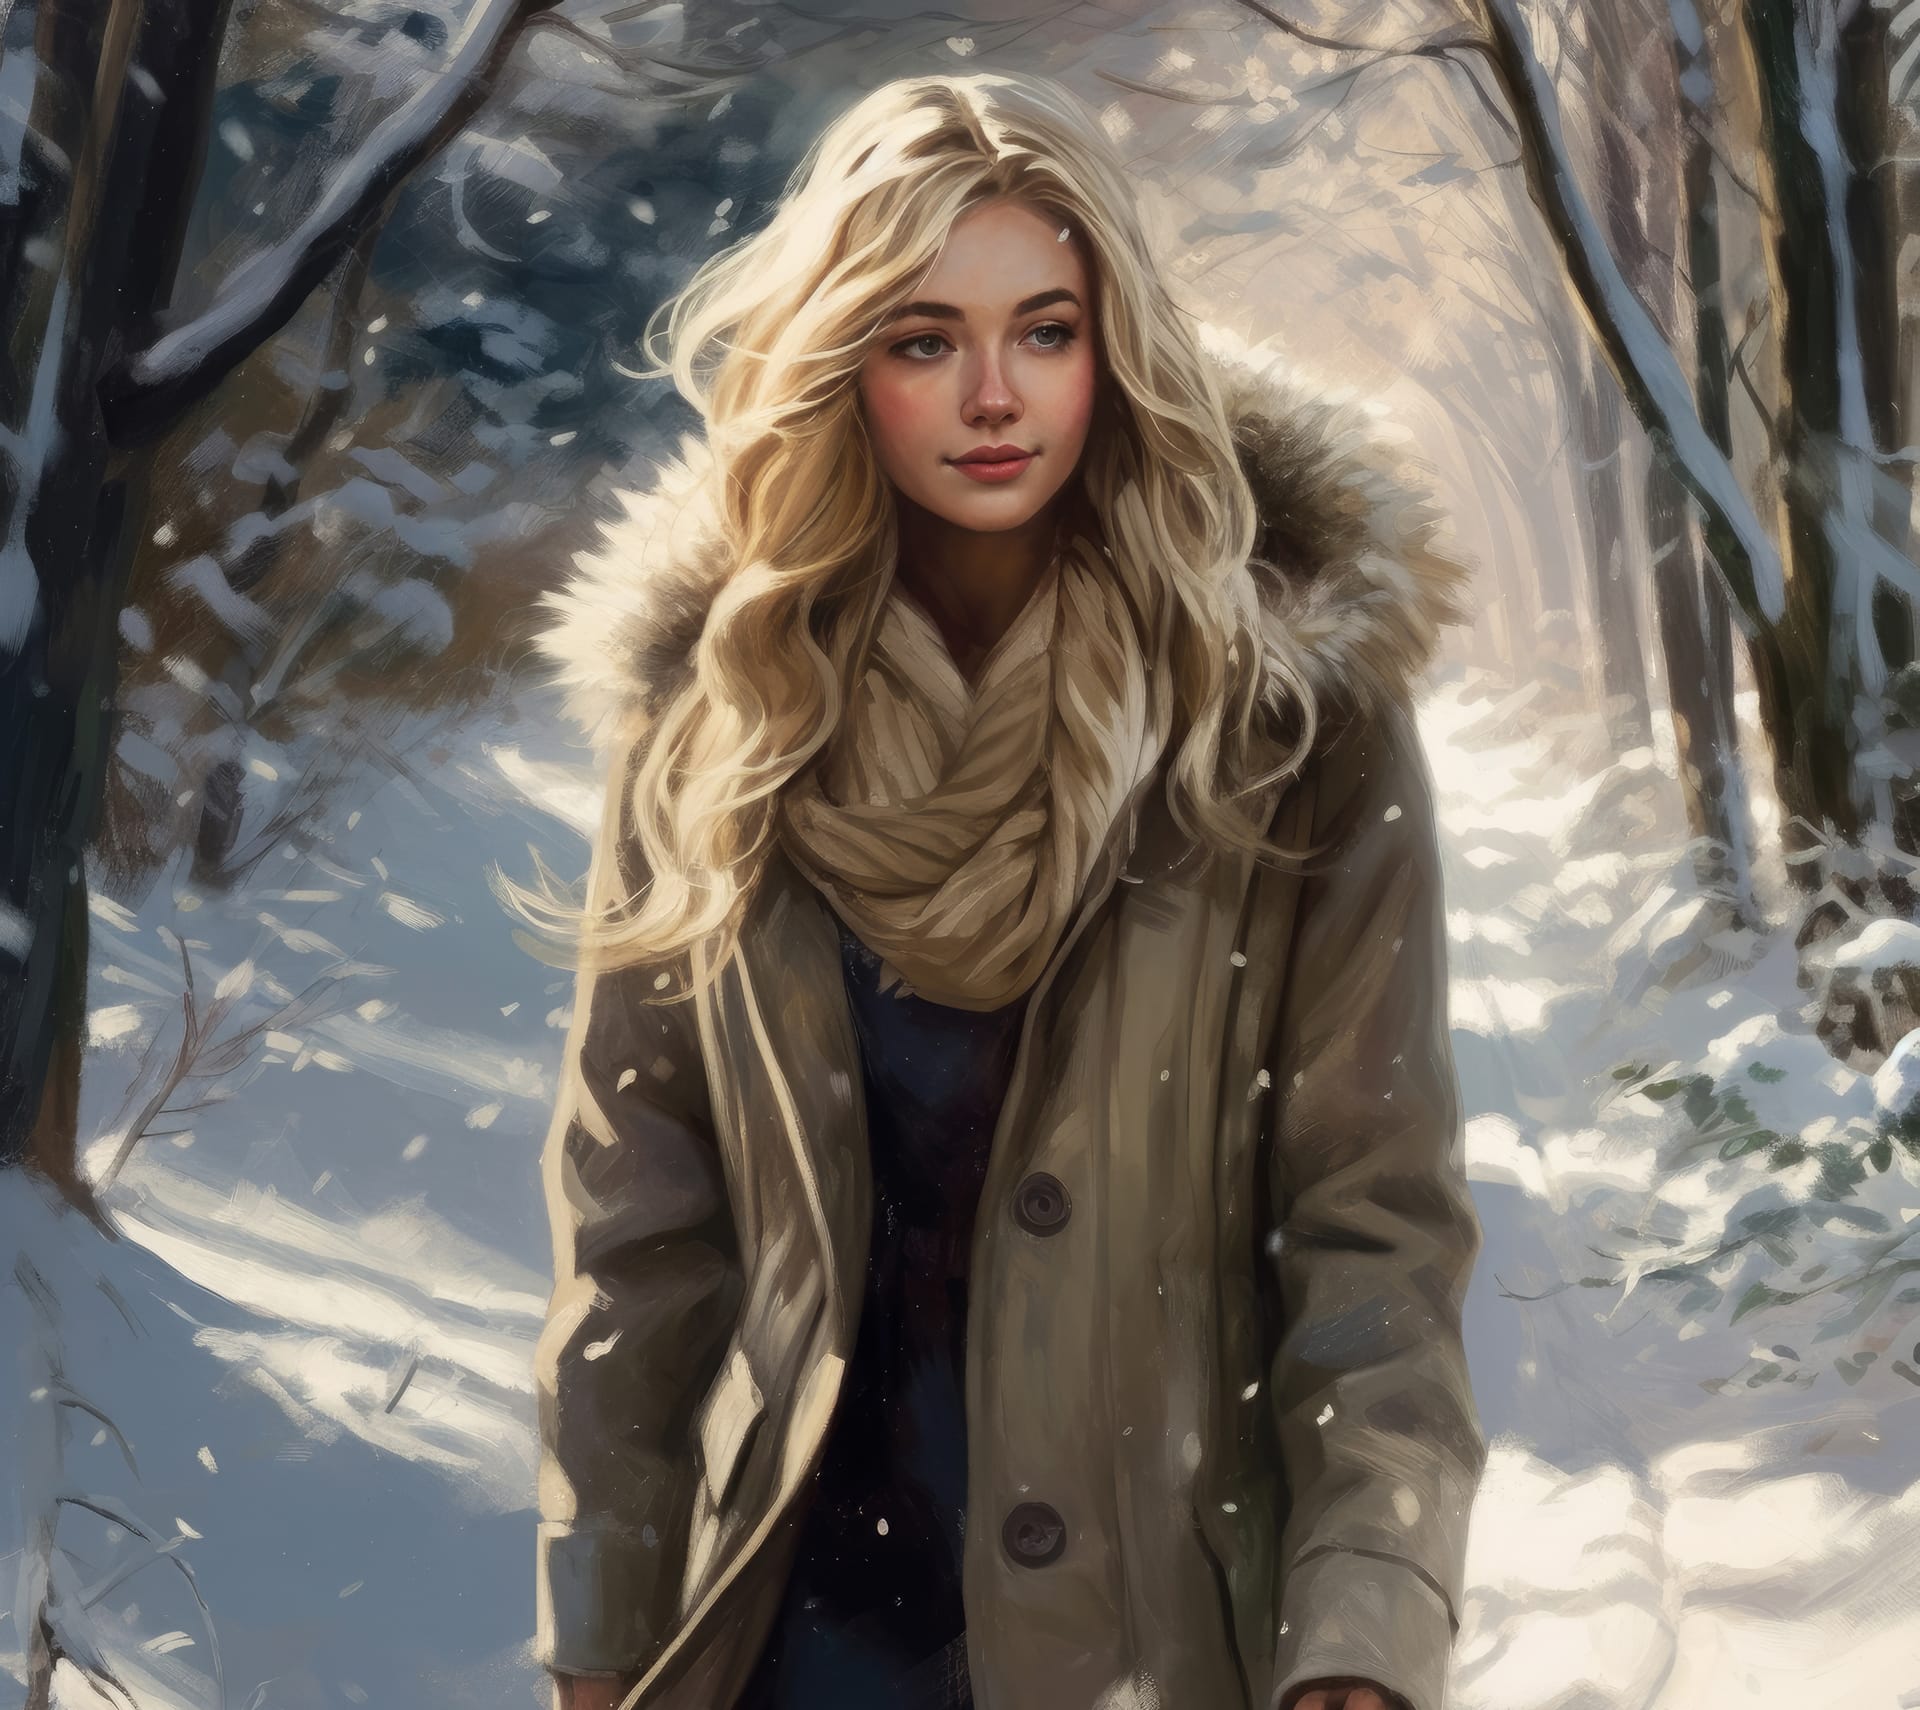 Young woman walking in the snow wearing coat with fur collar